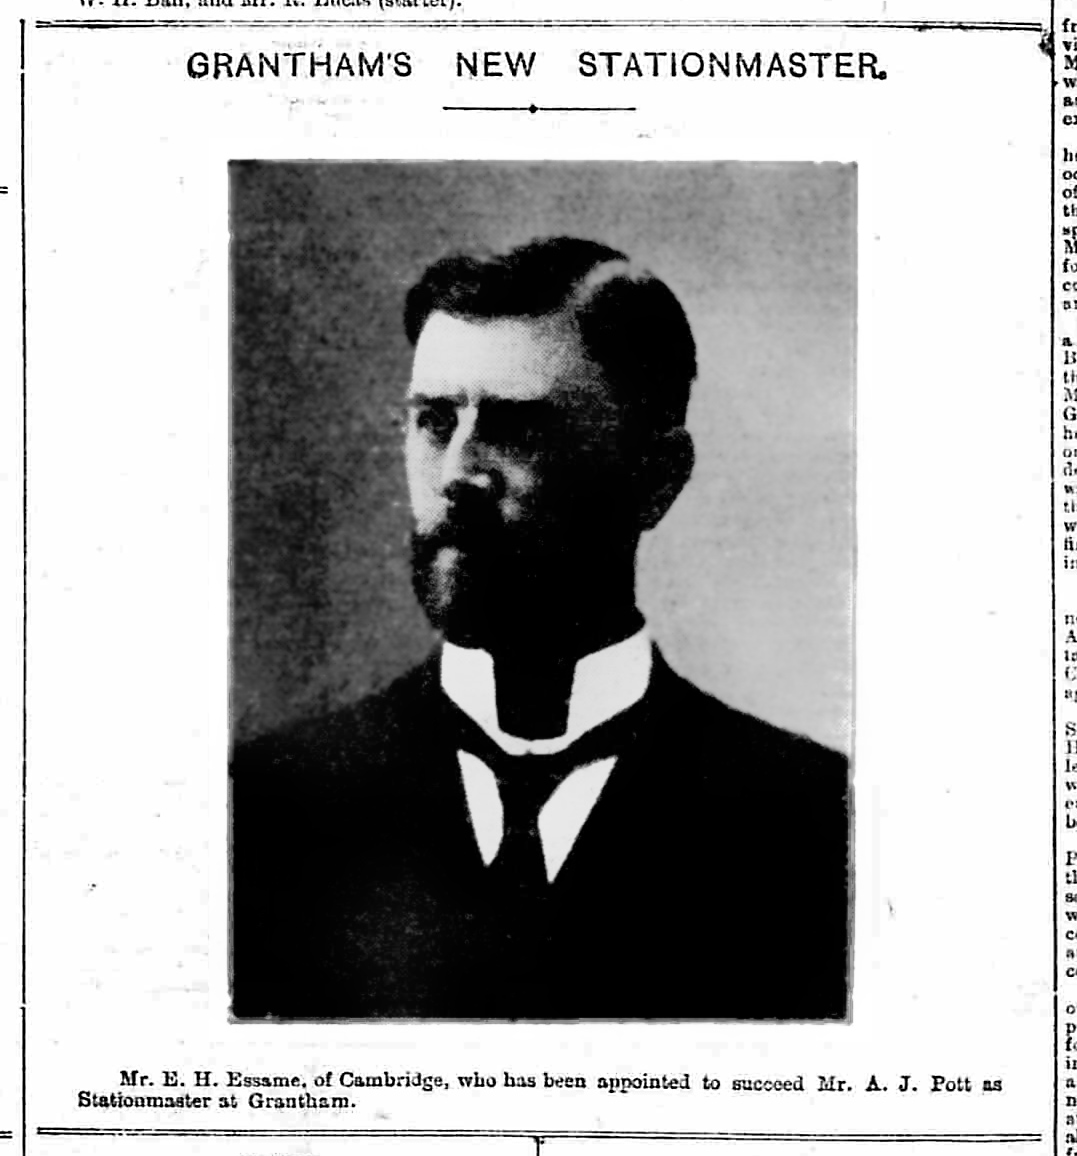 This photograph appeared in The Grantham Journal on 27th July 1912. From The British Newspaper Archive http://www.britishnewspaperarchive.co.uk/ Image © THE BRITISH LIBRARY BOARD. ALL RIGHTS RESERVED.